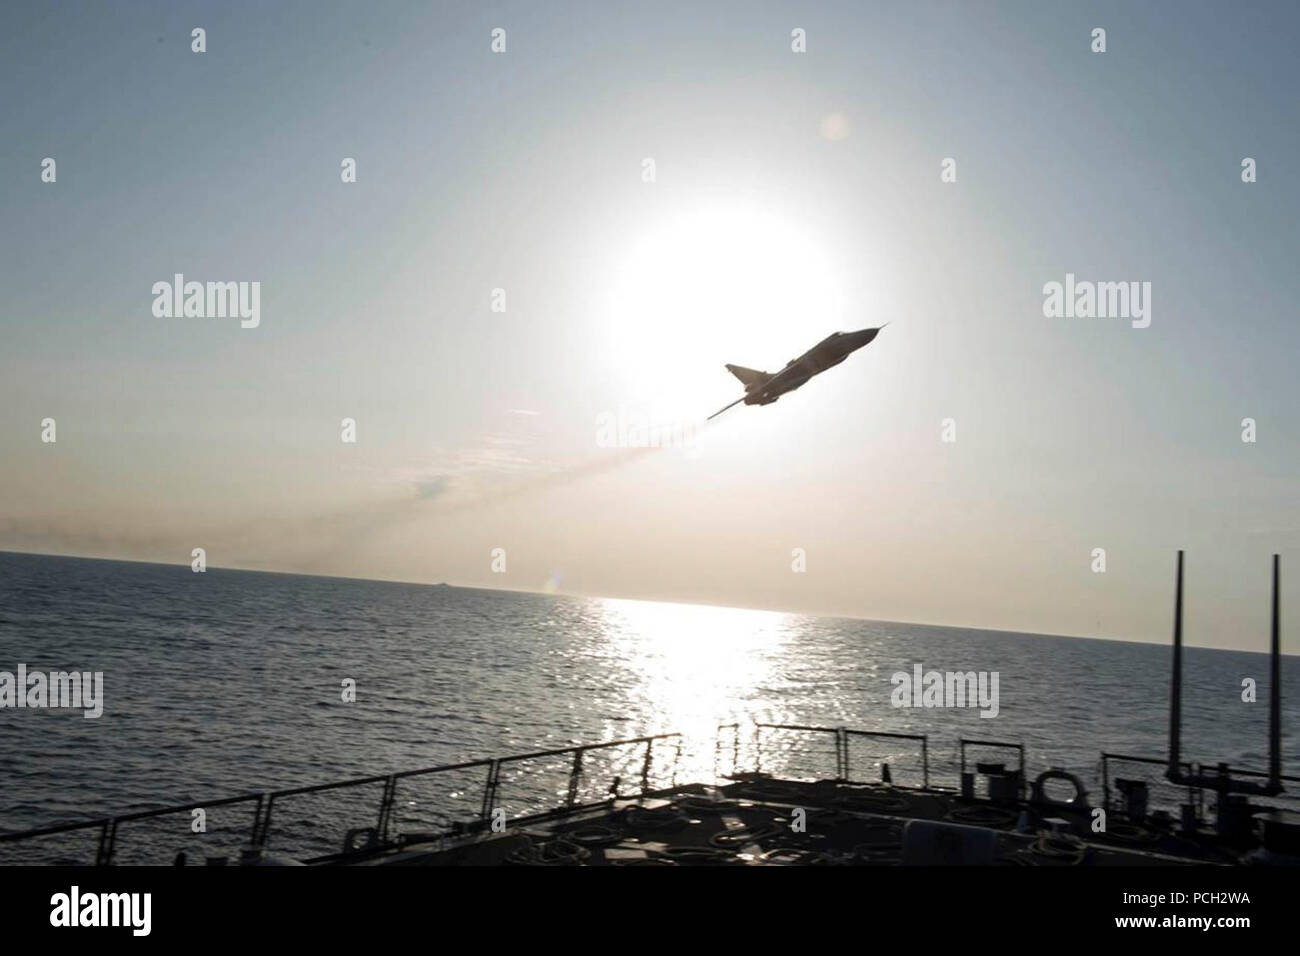 BALTIC SEA (April 12, 2016) A Russian Sukhoi Su-24 attack aircraft makes a low altitude pass by USS Donald Cook (DDG 75) April 12, 2016. Donald Cook, an Arleigh Burke-class guided-missile destroyer forward deployed to Rota, Spain, is conducting a routine patrol in the U.S. 6th Fleet area of operations in support of U.S. national security interests in Europe. Stock Photo